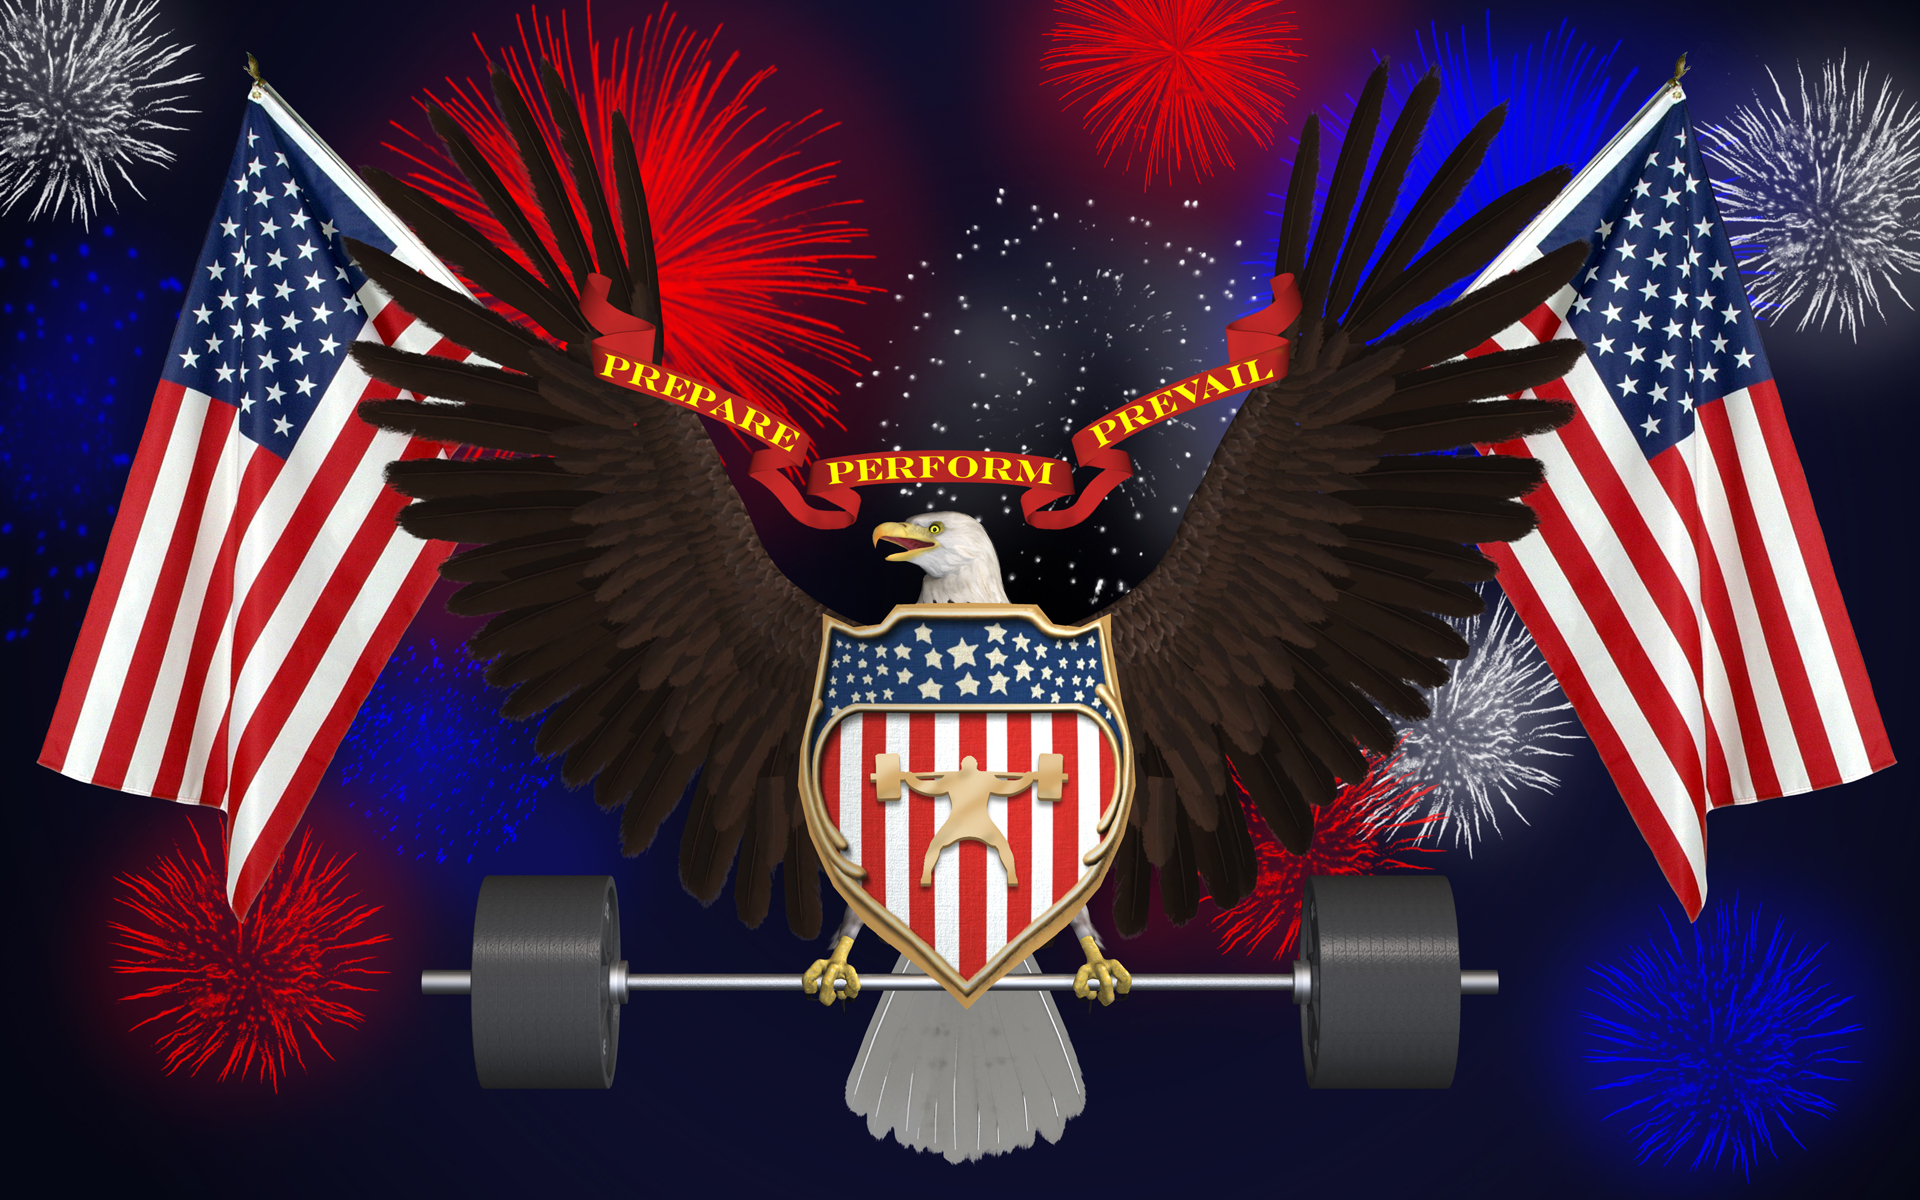 American Patriotic Wallpaper Images amp Pictures   Becuo